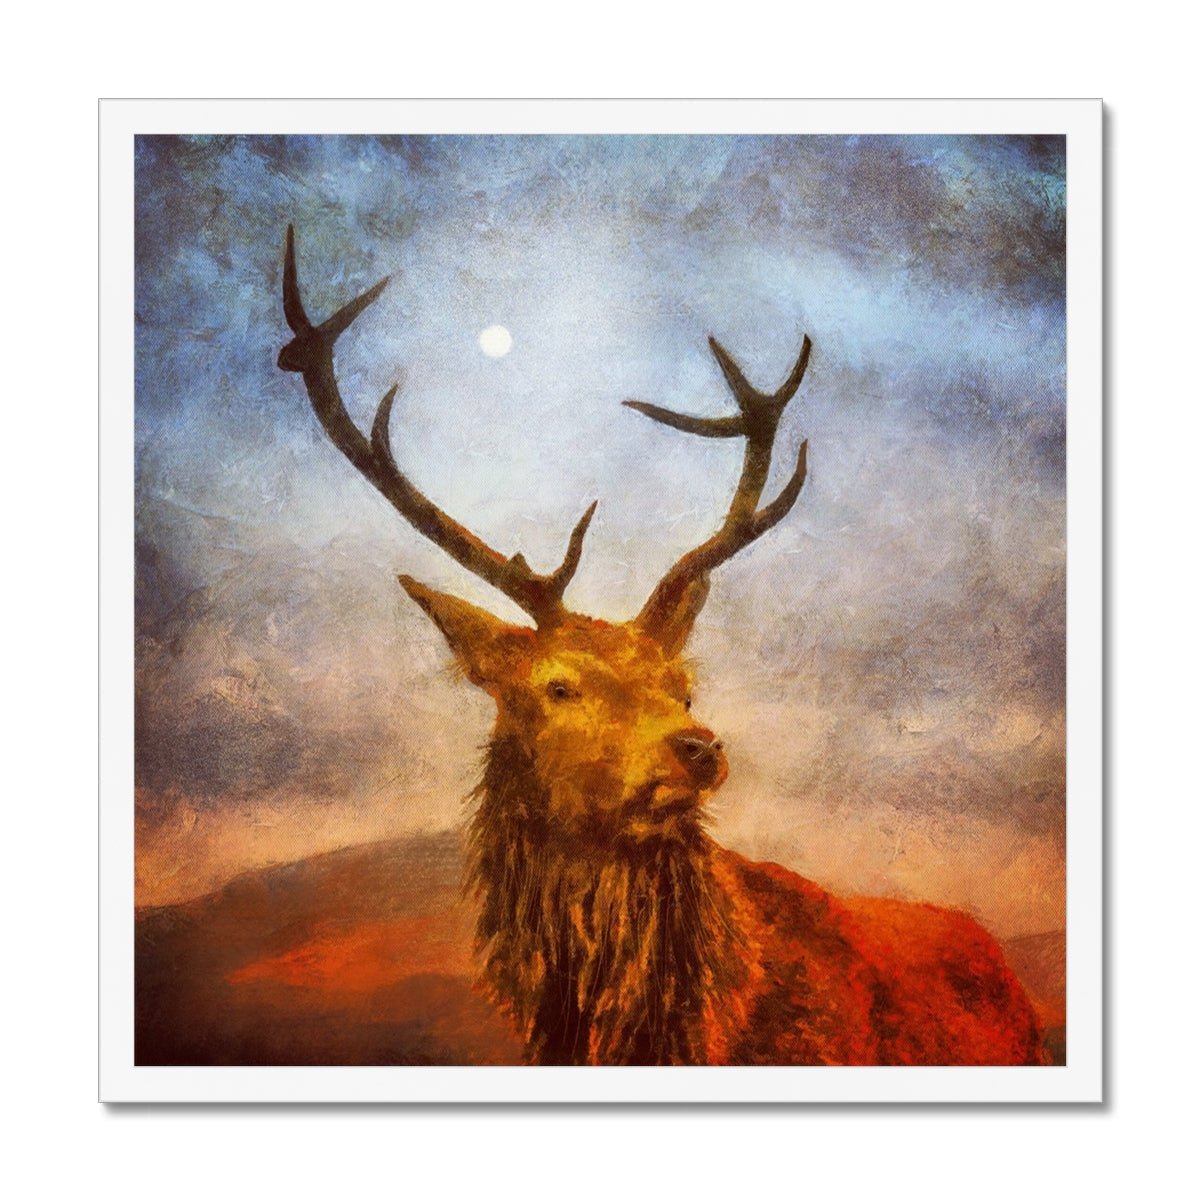 A Moonlit Highland Stag Painting | Framed Prints From Scotland-Framed Prints-Scottish Highlands & Lowlands Art Gallery-20"x20"-White Frame-Paintings, Prints, Homeware, Art Gifts From Scotland By Scottish Artist Kevin Hunter